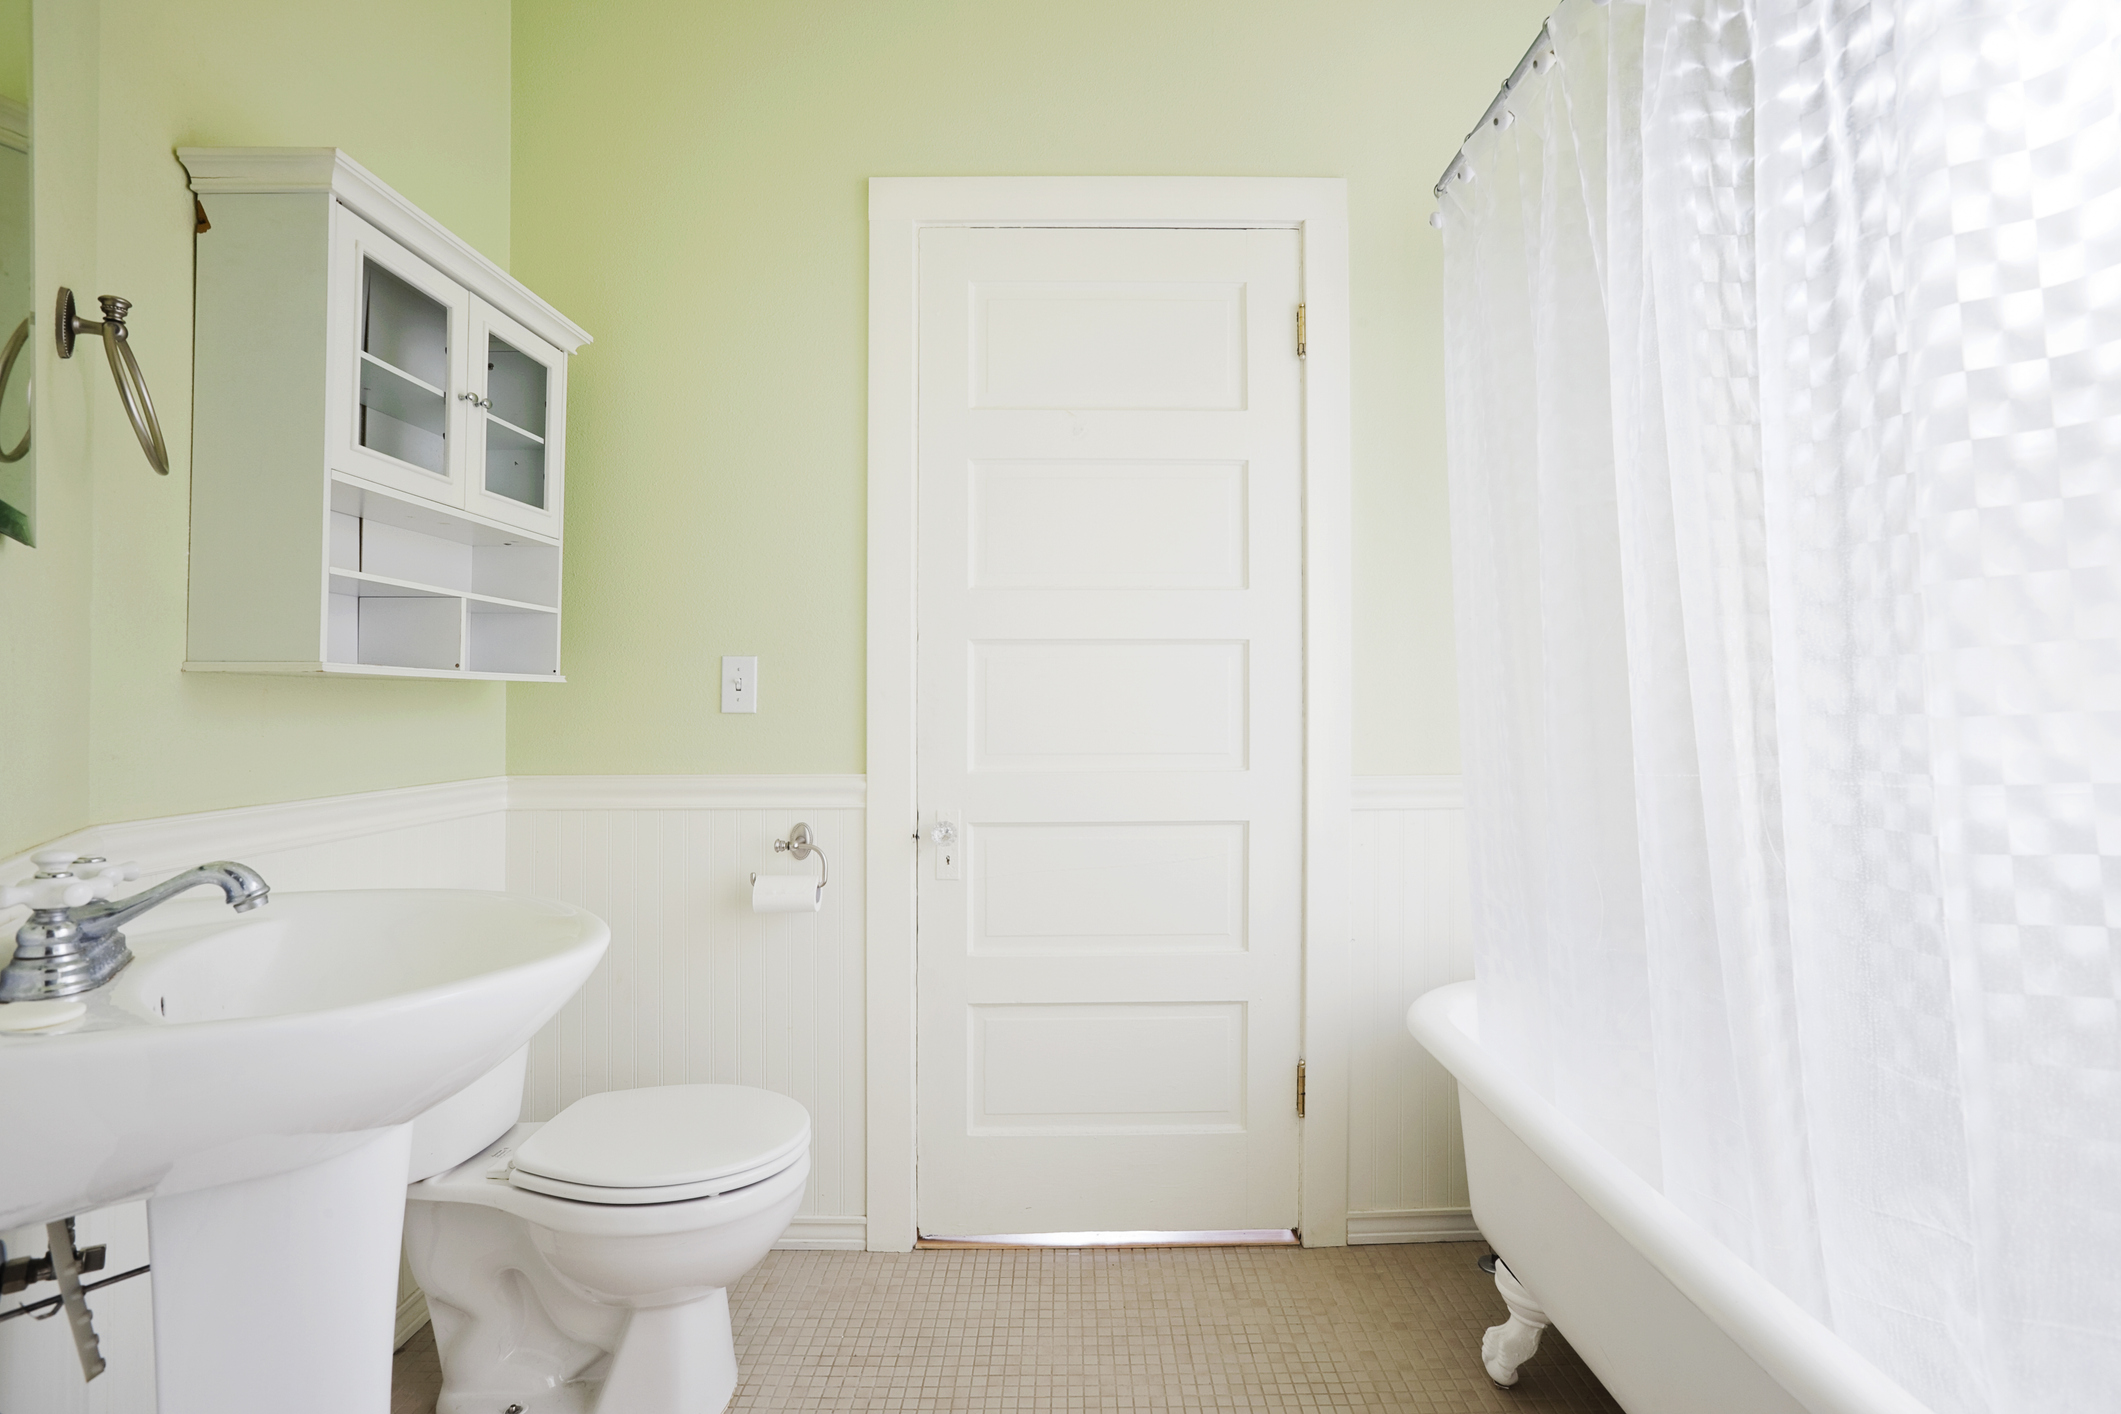 Lifestyle image of a bath with a shower curtain around it in a pastel green bathroom